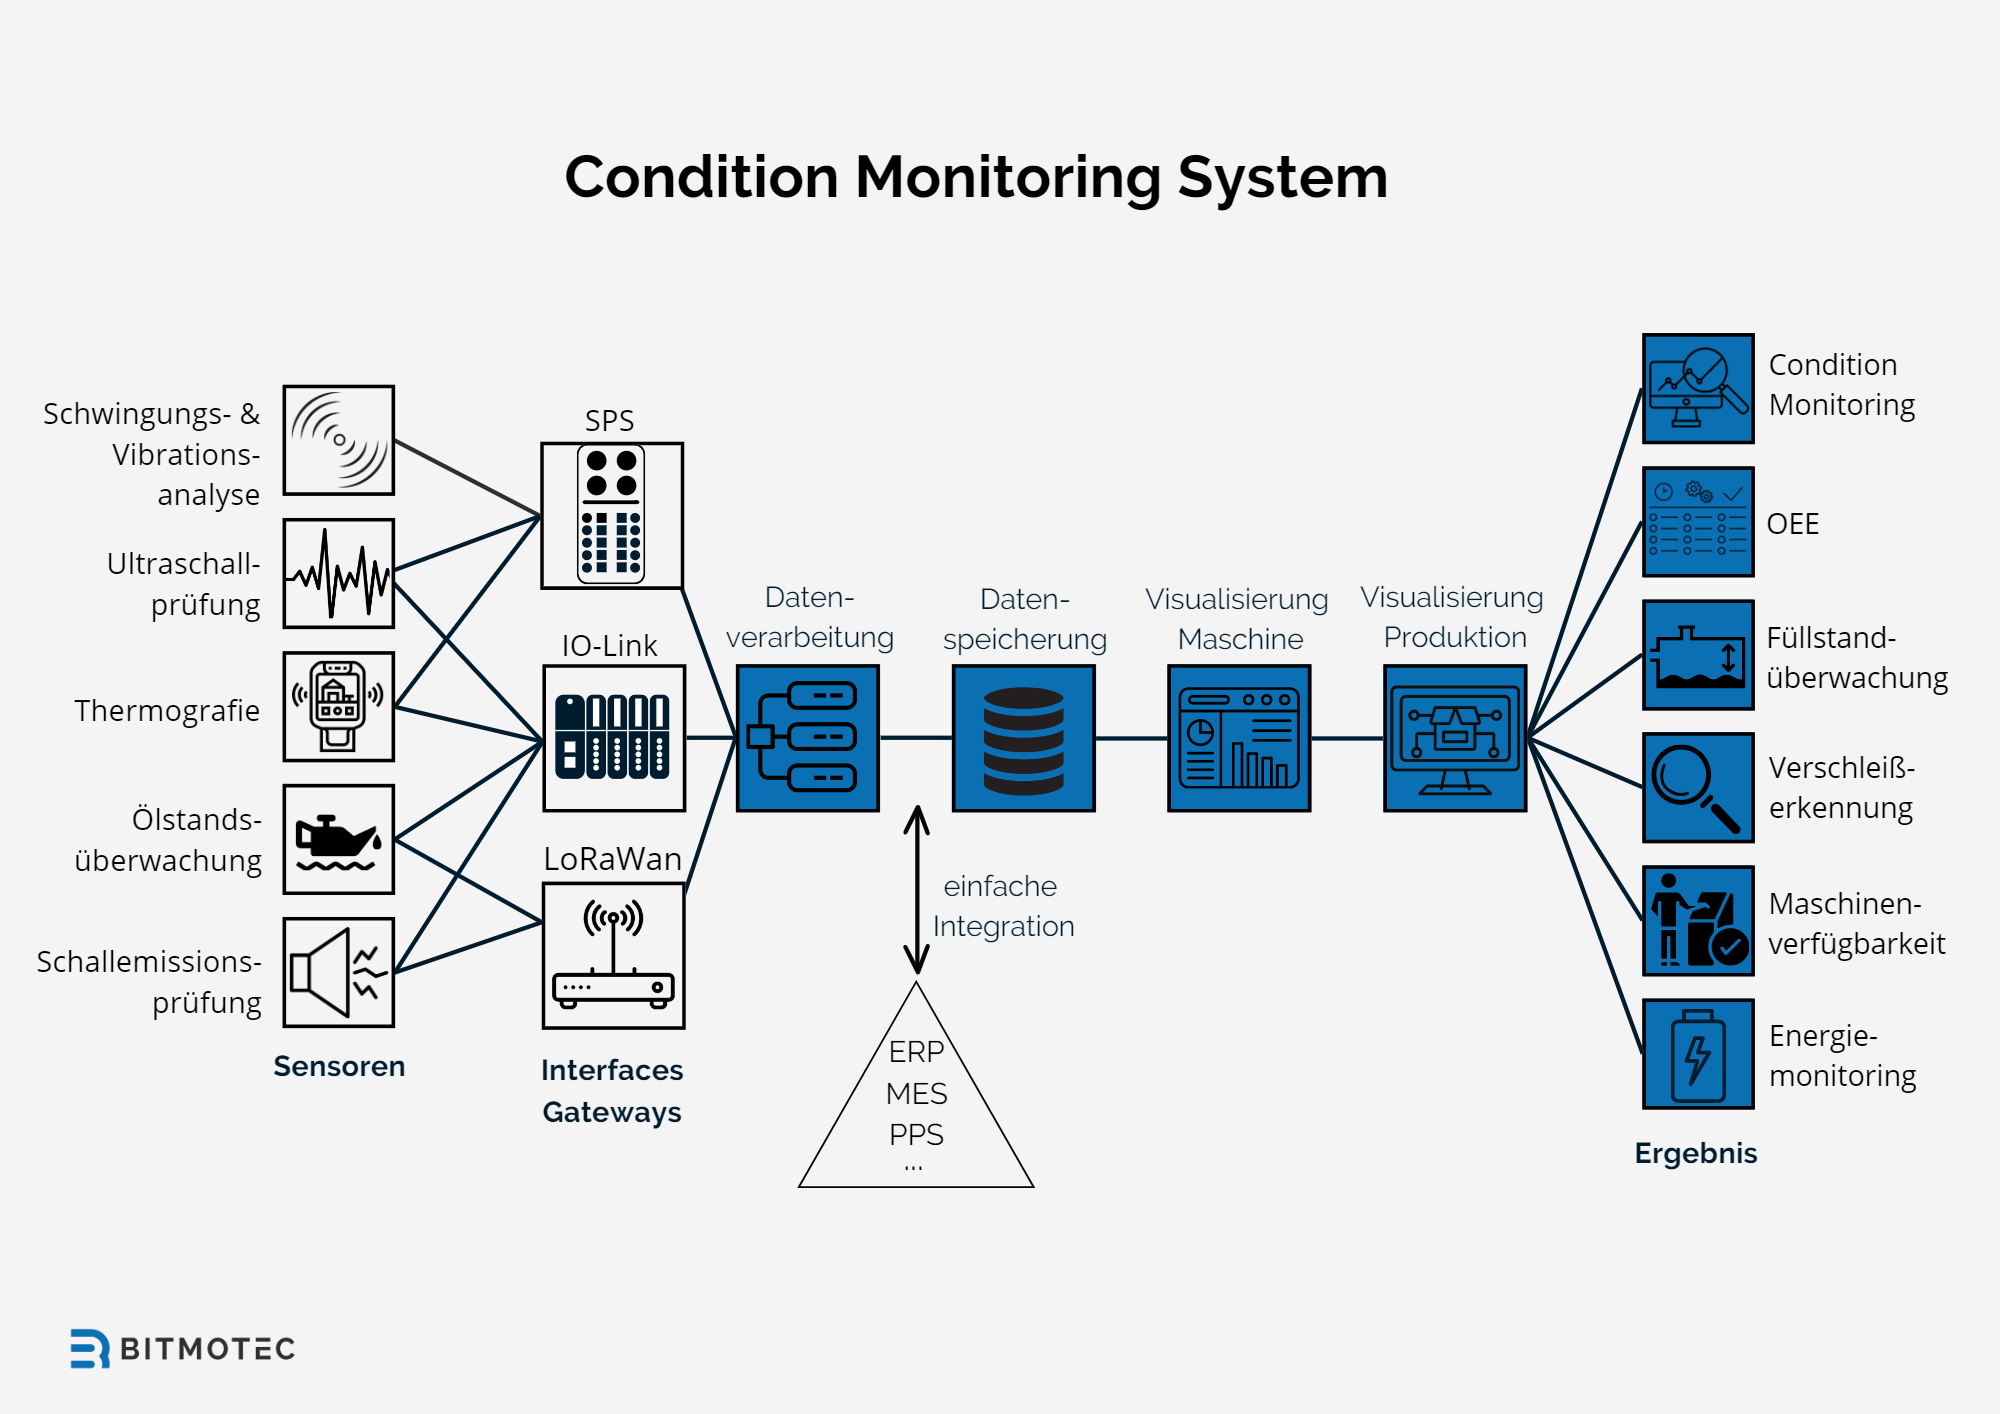 Condition Monitoring System - Structure with overview of the individual components